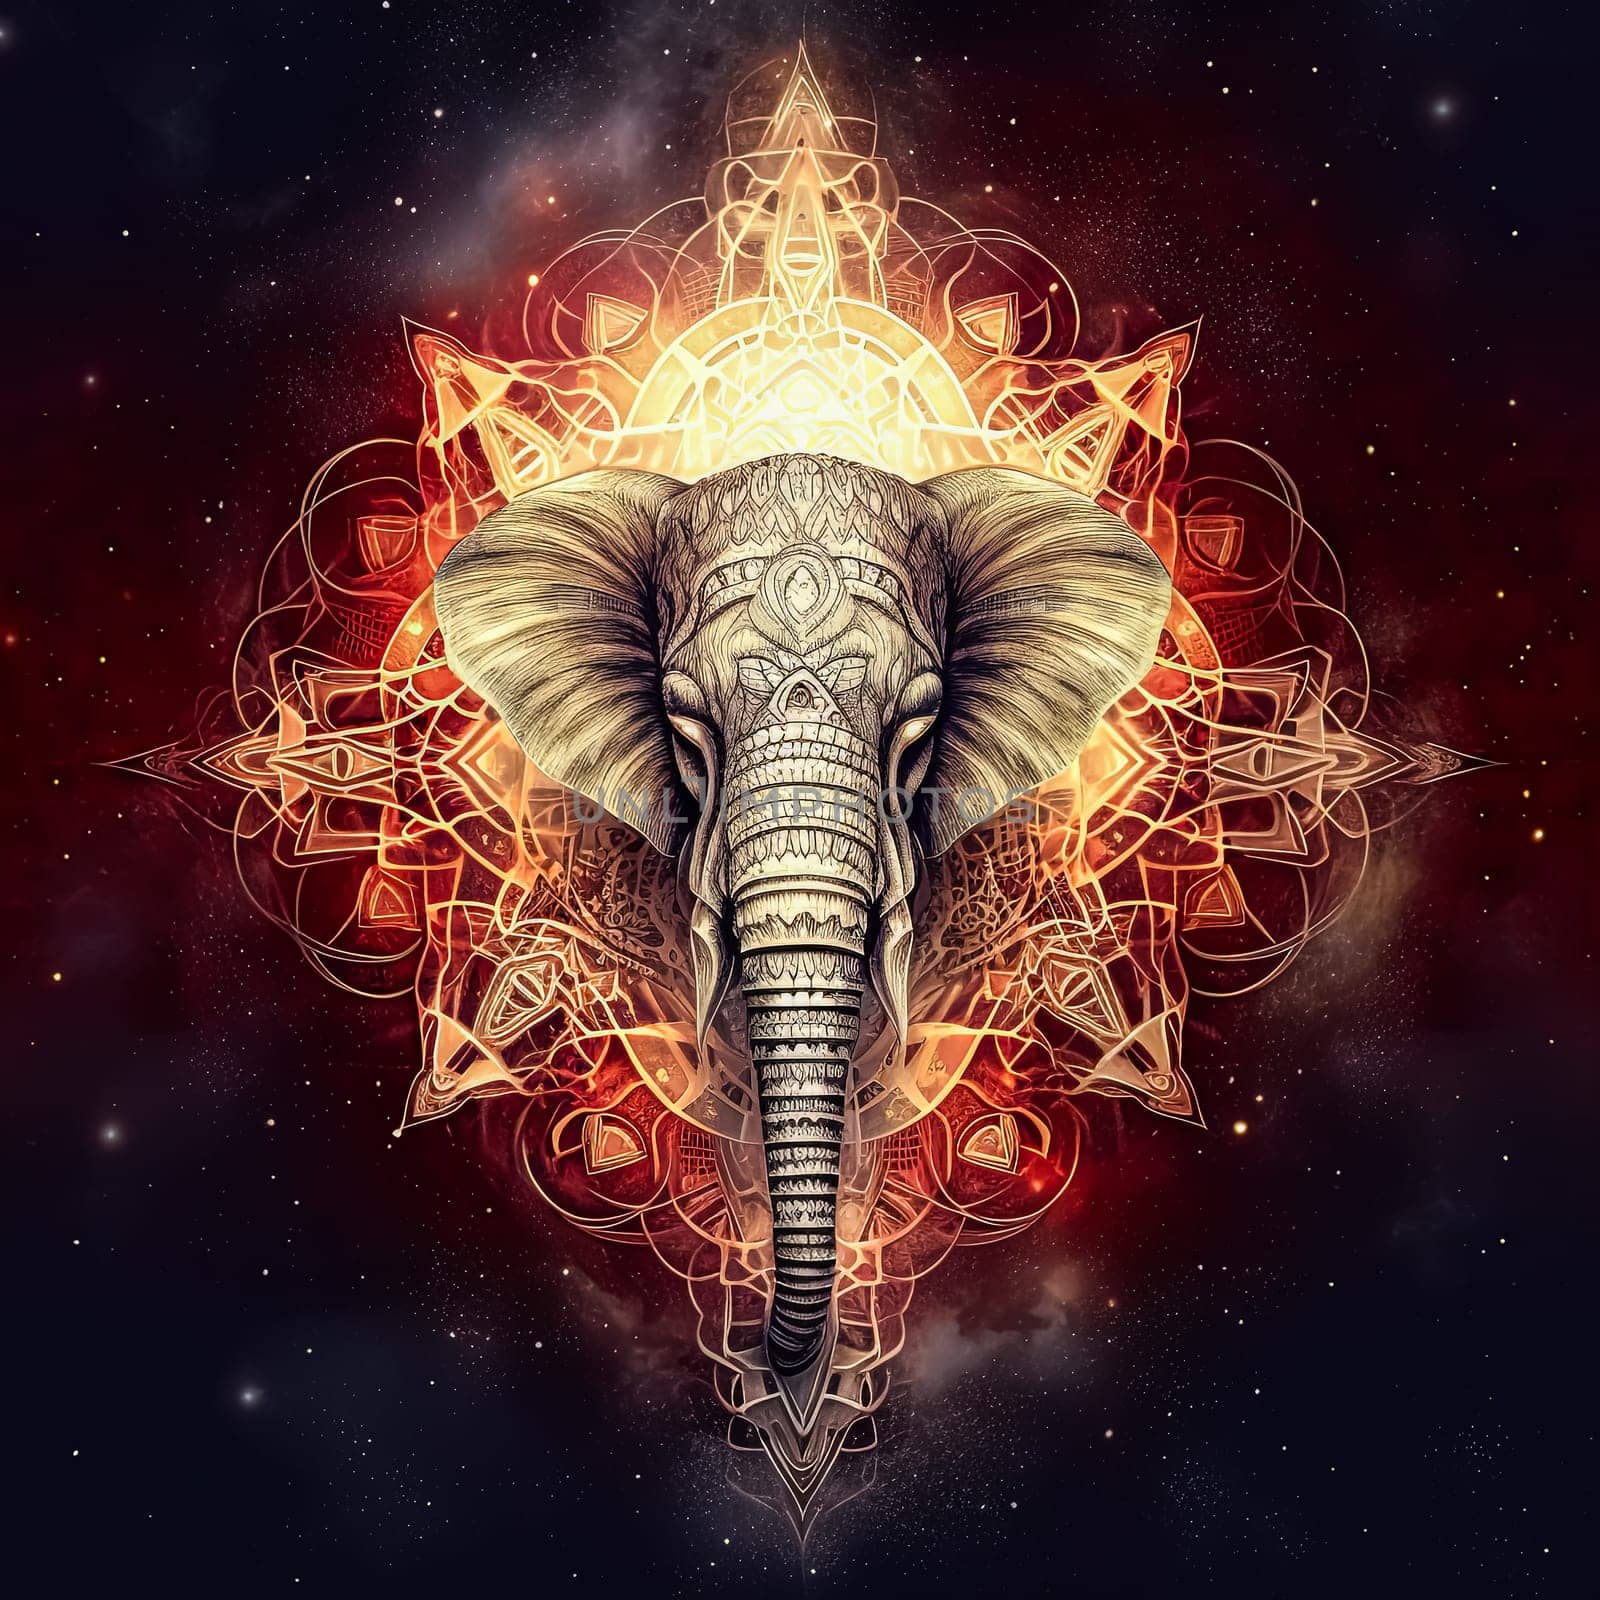 A large elephant with a red background and a star in the center. The elephant is surrounded by a lot of swirls and patterns